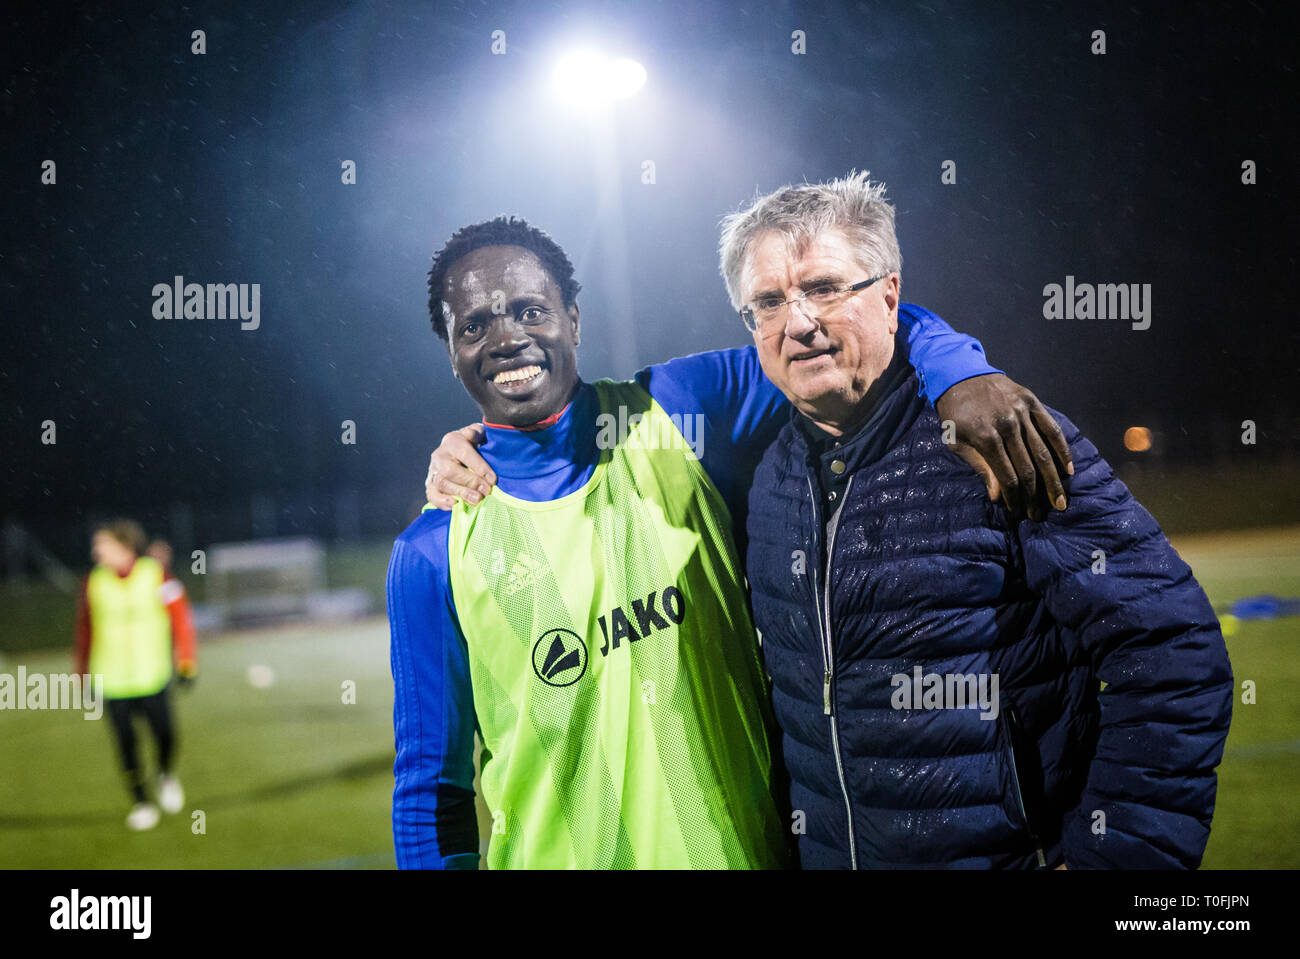 Lauchringen, Germany. 15th Mar, 2019. Kebba Manneh (l) stands together with the 1st chairman of the SC Lauchringen, Thomas Kummer at the evening training on the soccer field. (to dpa 'Fled, insulted, tolerated - honored? Kebba Manneh's story' from 20.03.2019) Credit: Christoph Schmidt/dpa/Alamy Live News Stock Photo